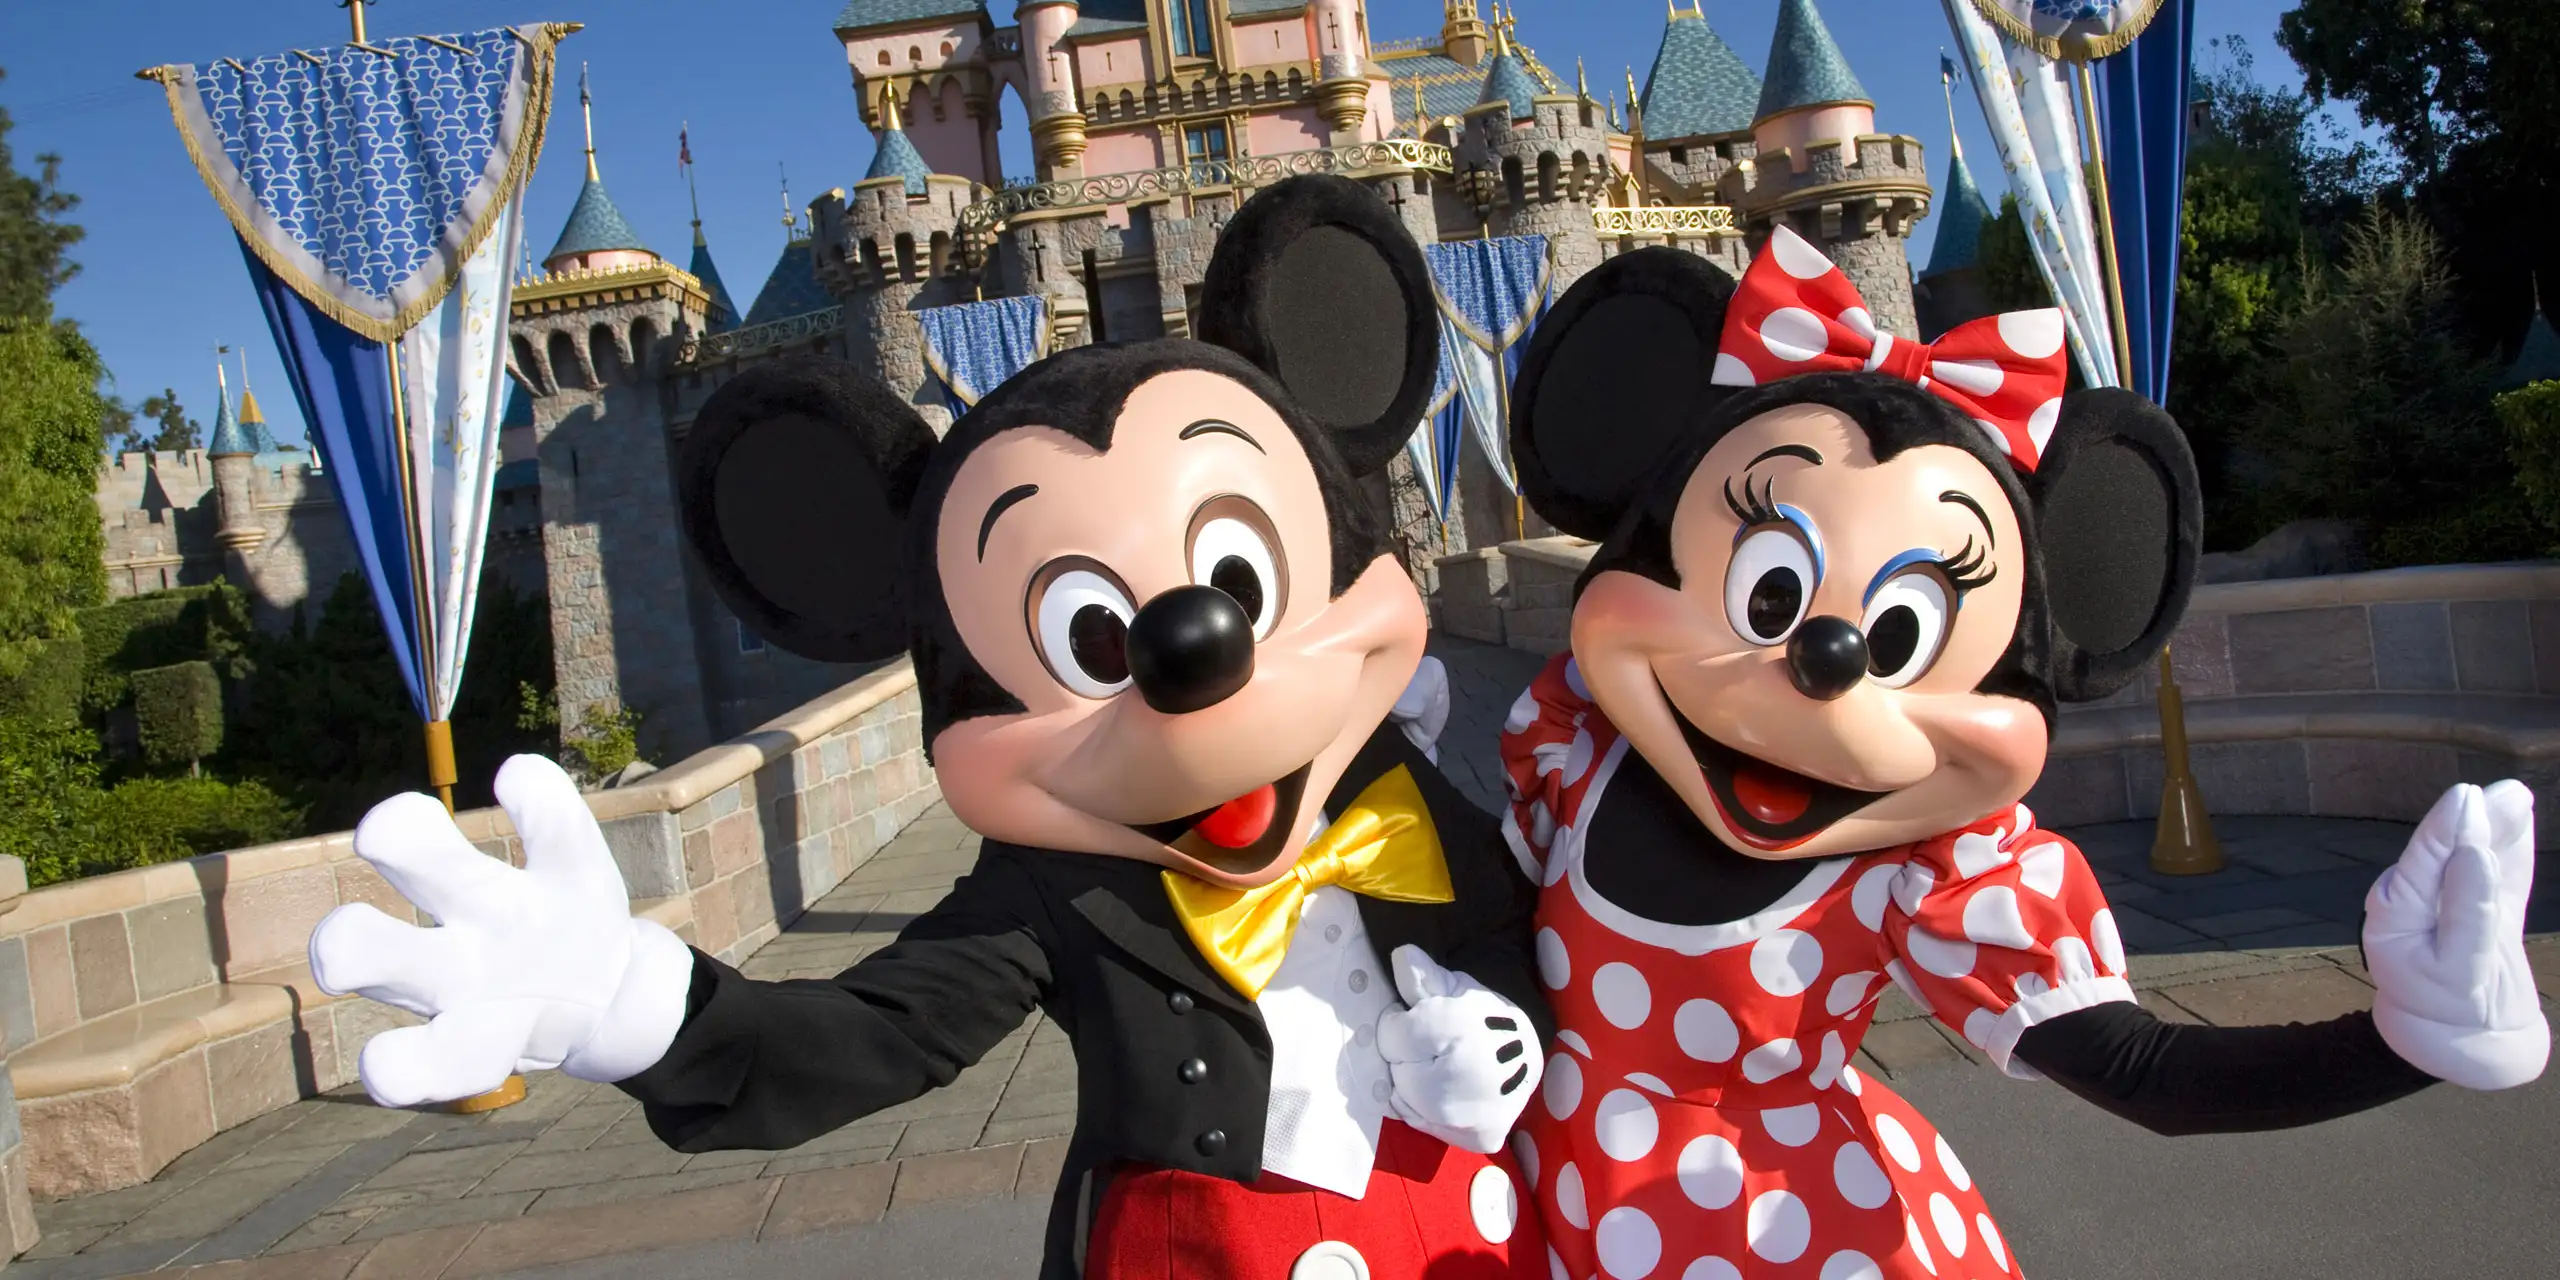 https://www.familyvacationcritic.com/wp-content/webp-express/webp-images/doc-root/wp-content/uploads/sites/19/2019/09/mickey-minnie-mouse.jpg.webp